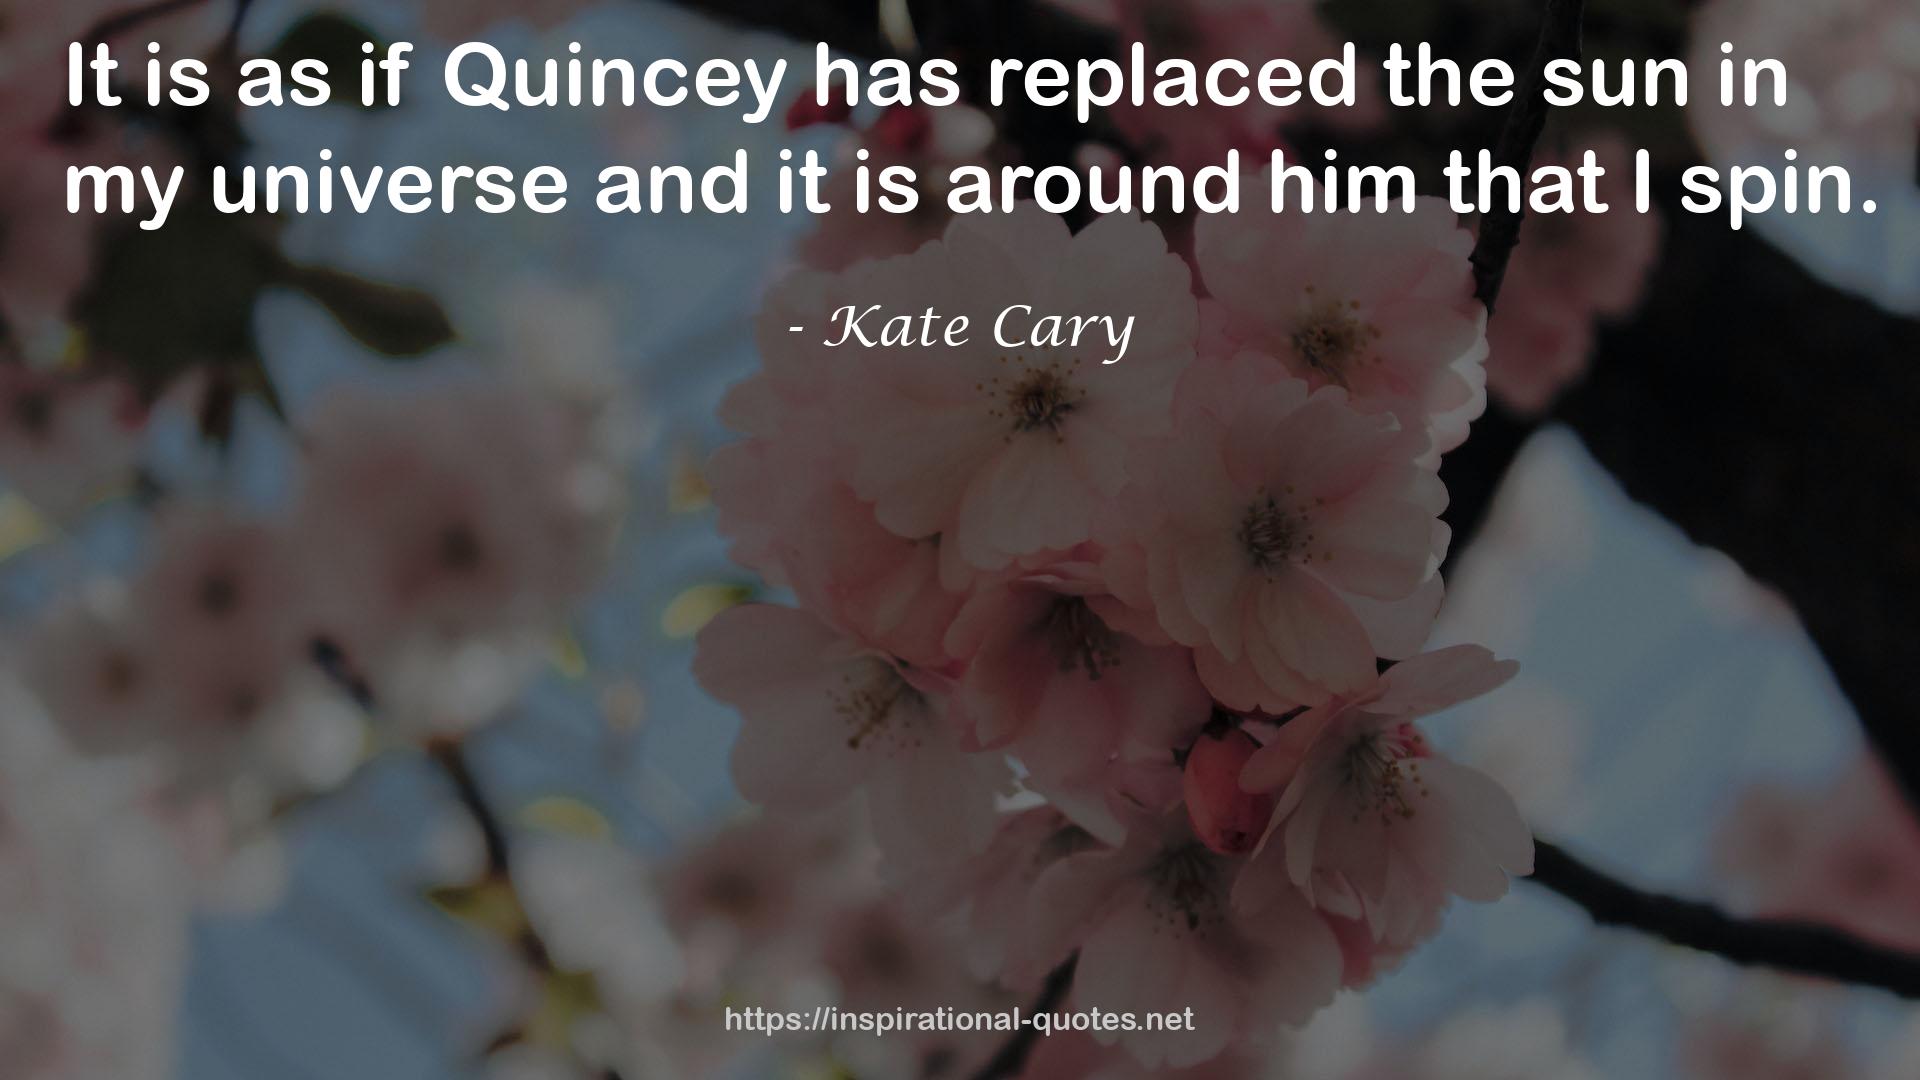 Kate Cary QUOTES